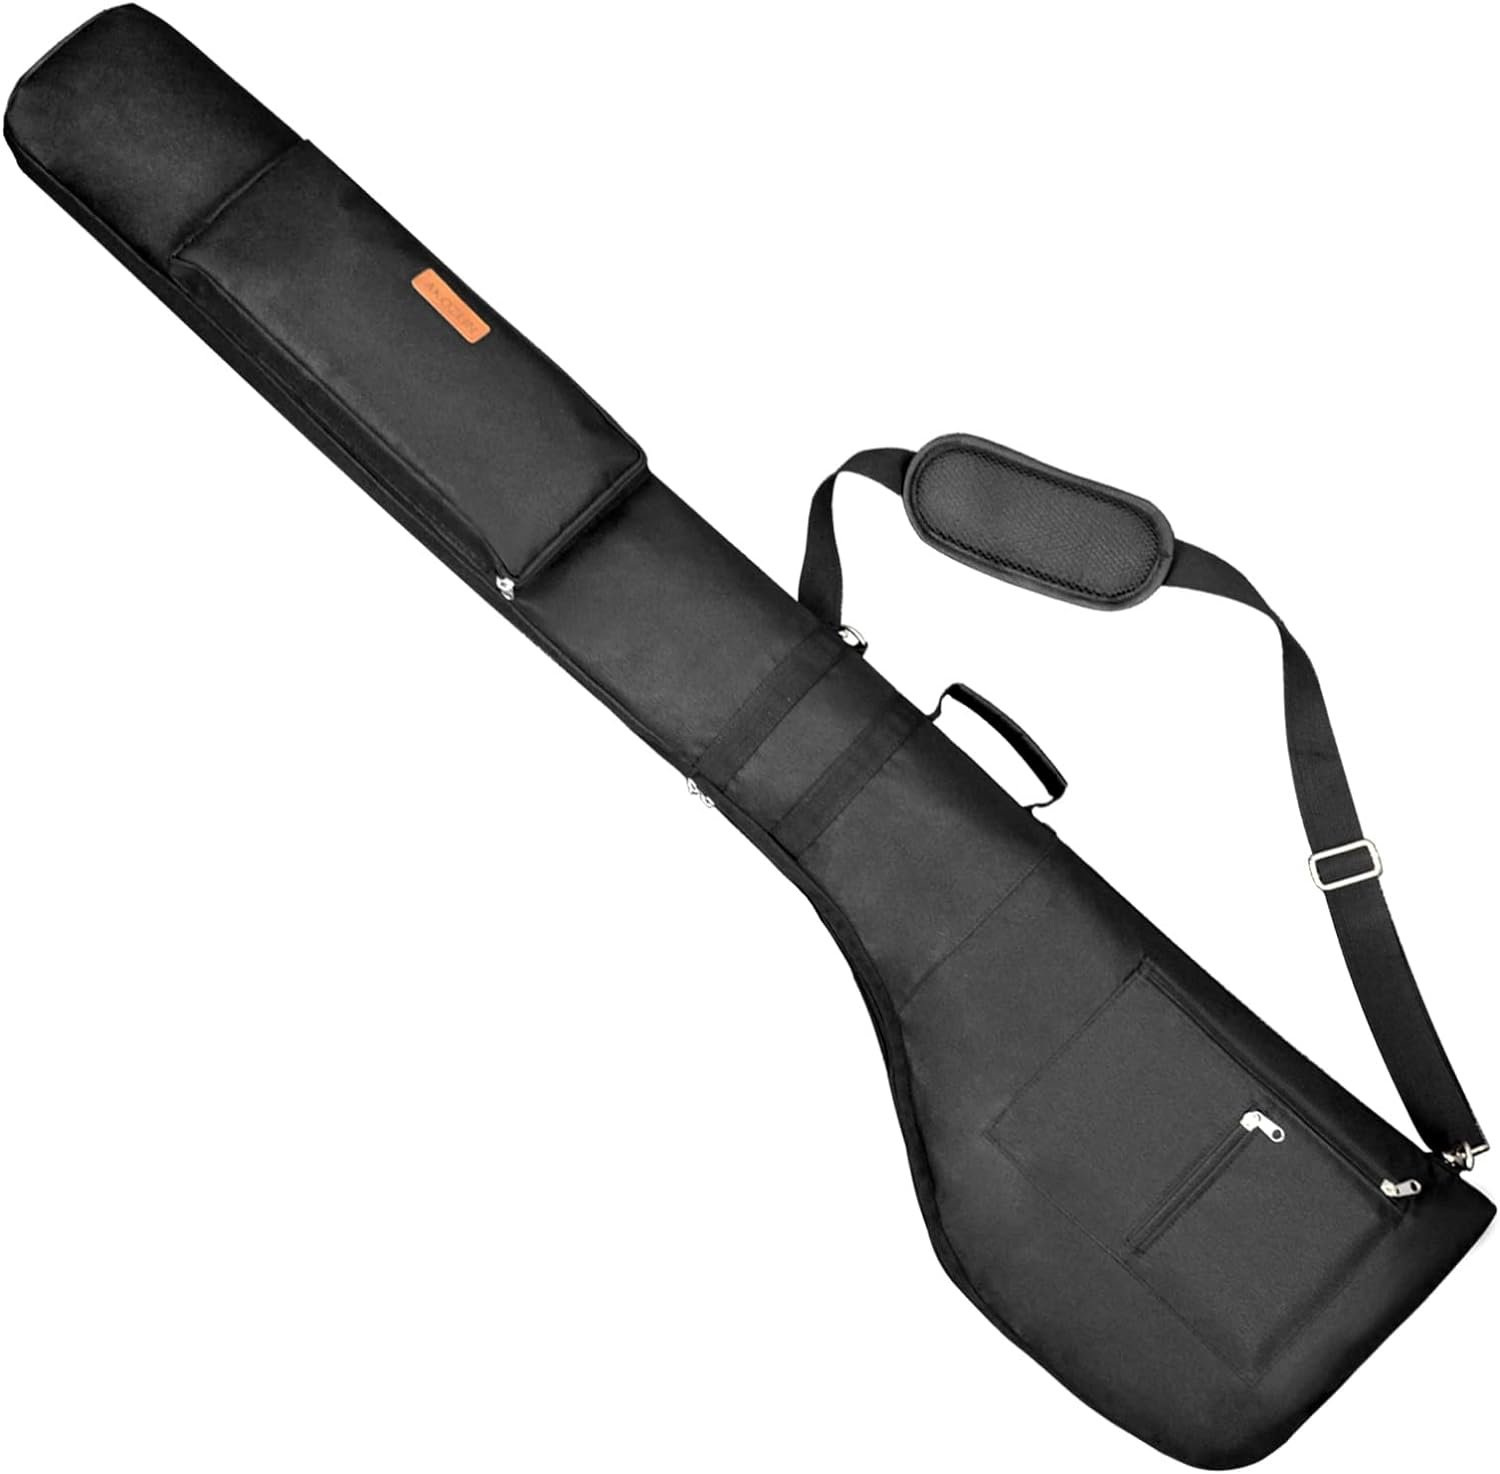 AKOZLIN Golf Carry Bag 8-10 Golf Clubs Lightweight Foldable Travel Golf Case with Strap Waterproof Sunday Bag